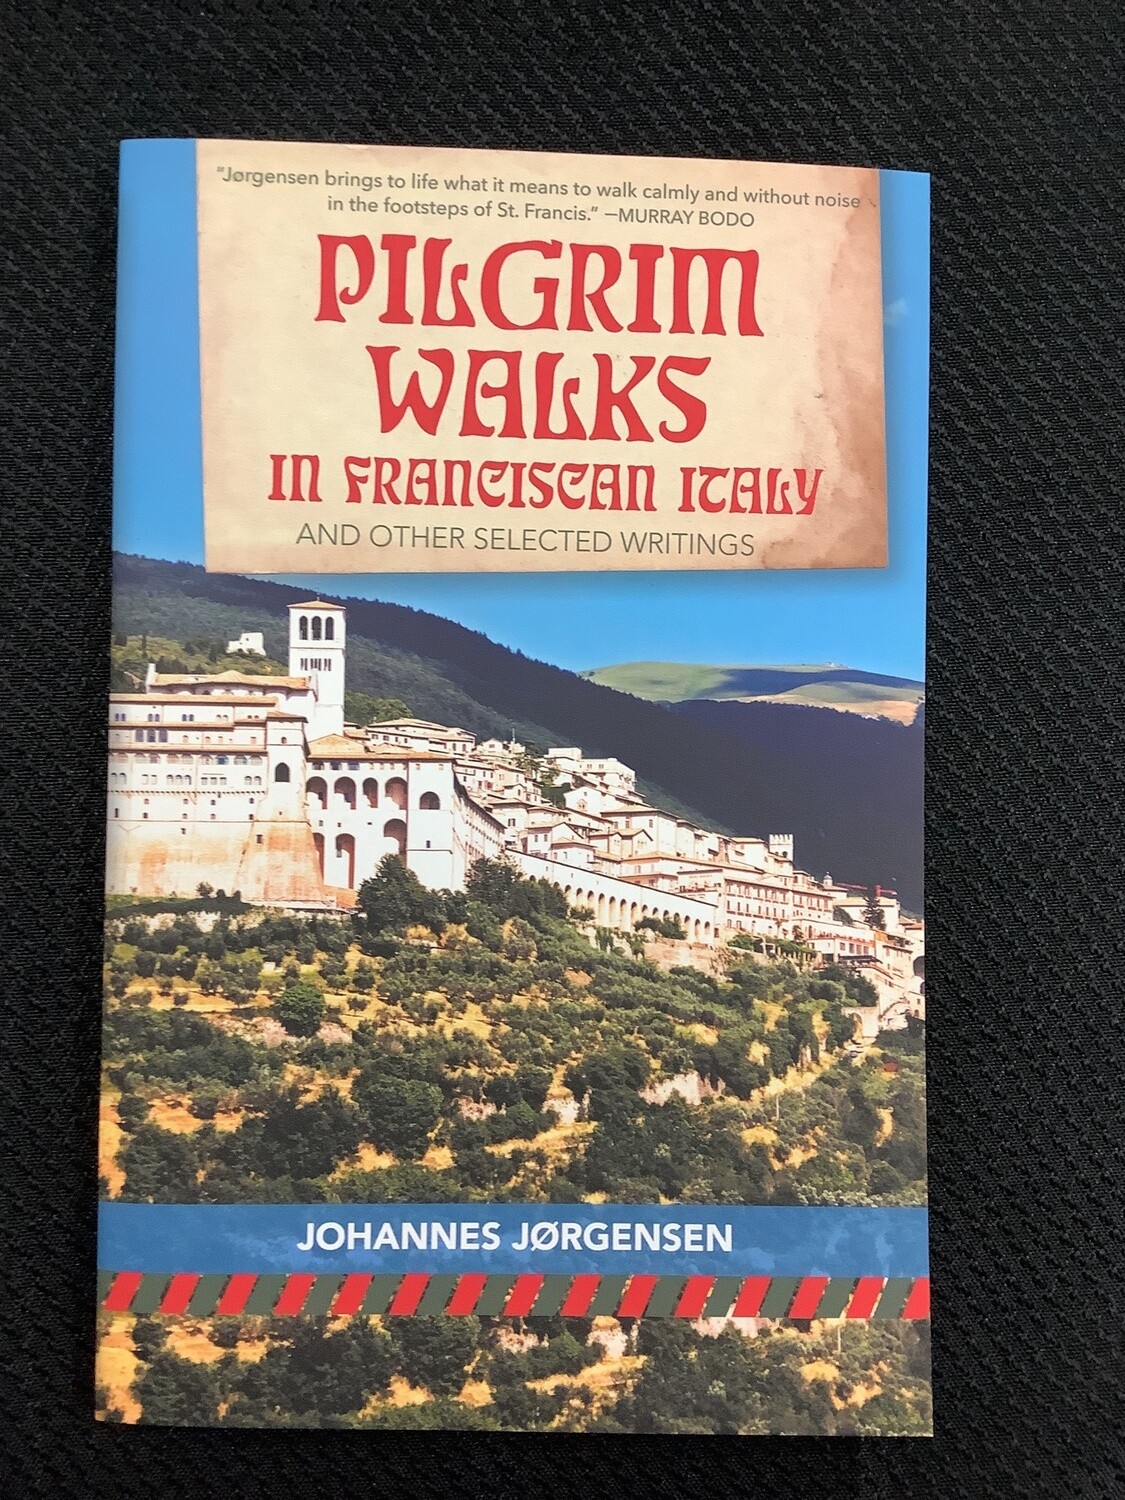 Pilgrim Walks in Franciscan Italy and Other Selected Writings - Johannesburg Jørgensen